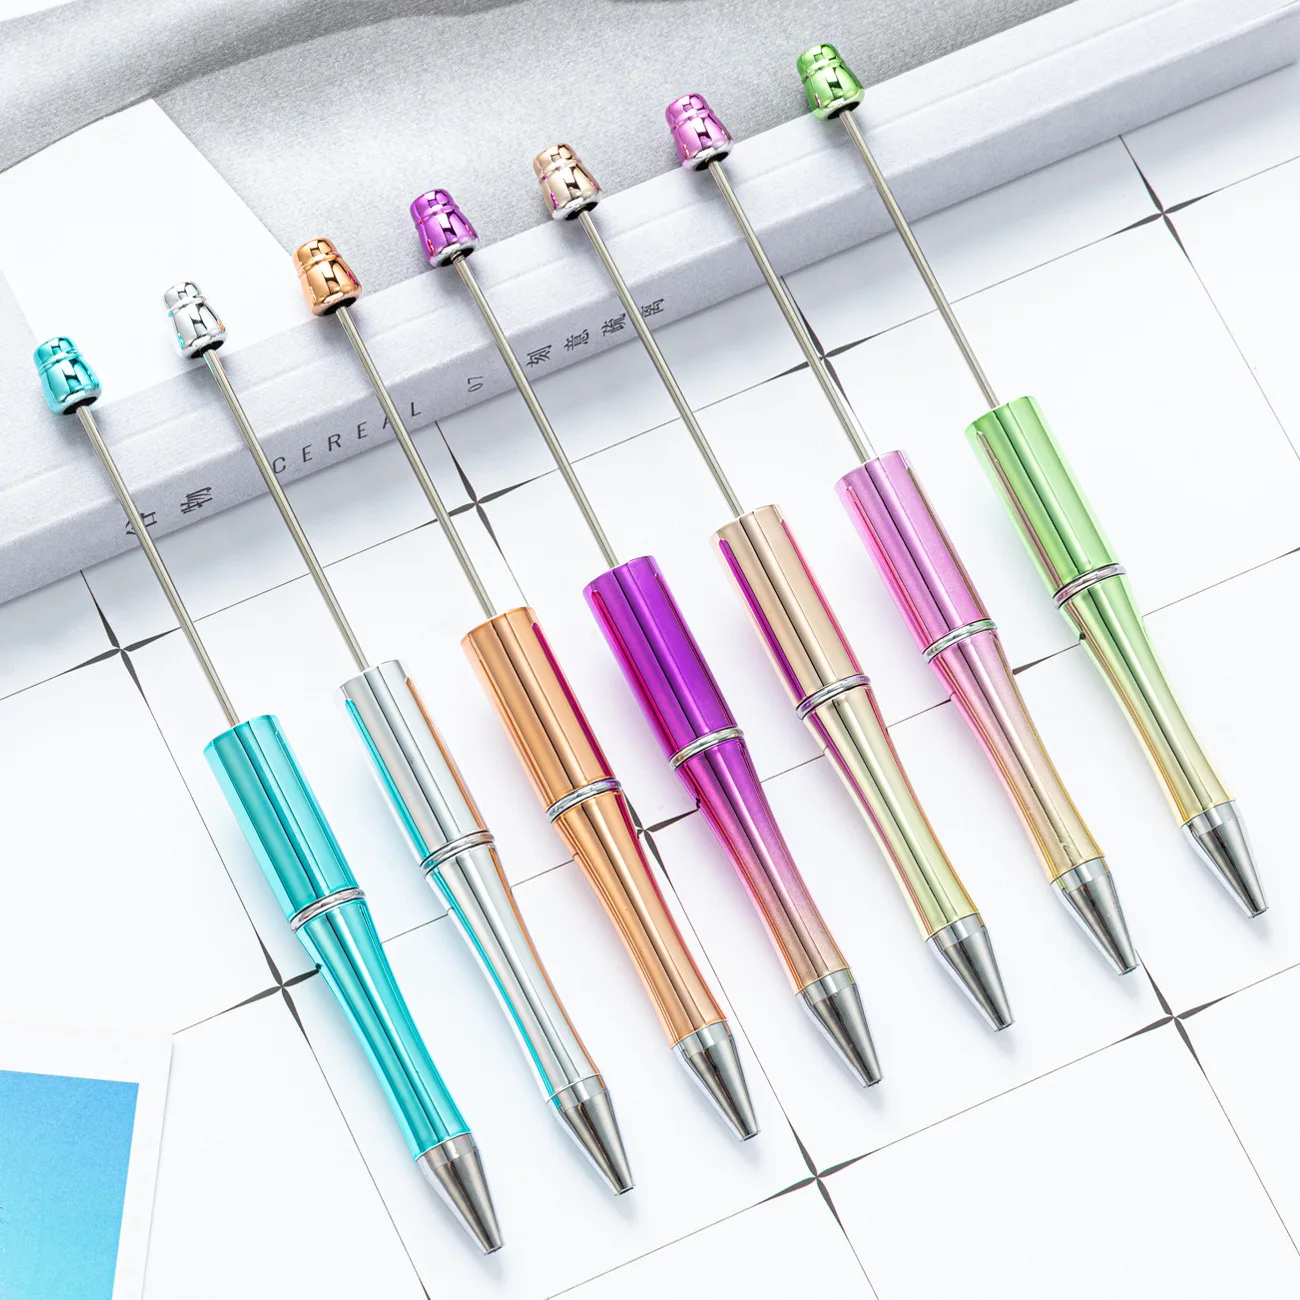 20pcs Beaded Pen Kids Gift Ballpoint Pen Gift Wedding Favors Party Favors for Kids Birthday Baby Shower Favors for Guest Gifts